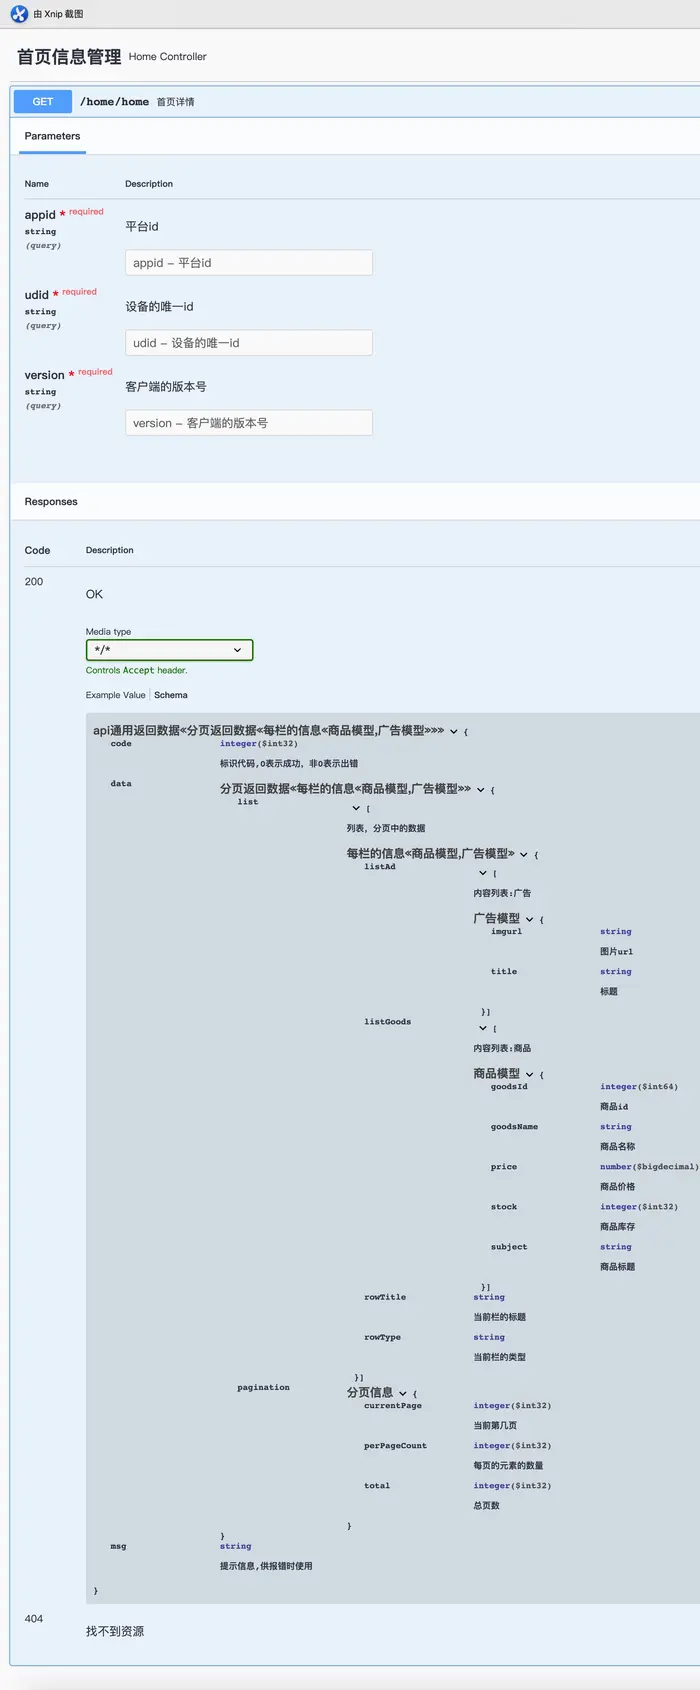 spring boot:swagger3文档展示分页和分栏的列表数据（swagger 3.0.0 / spring boot 2.3.3）